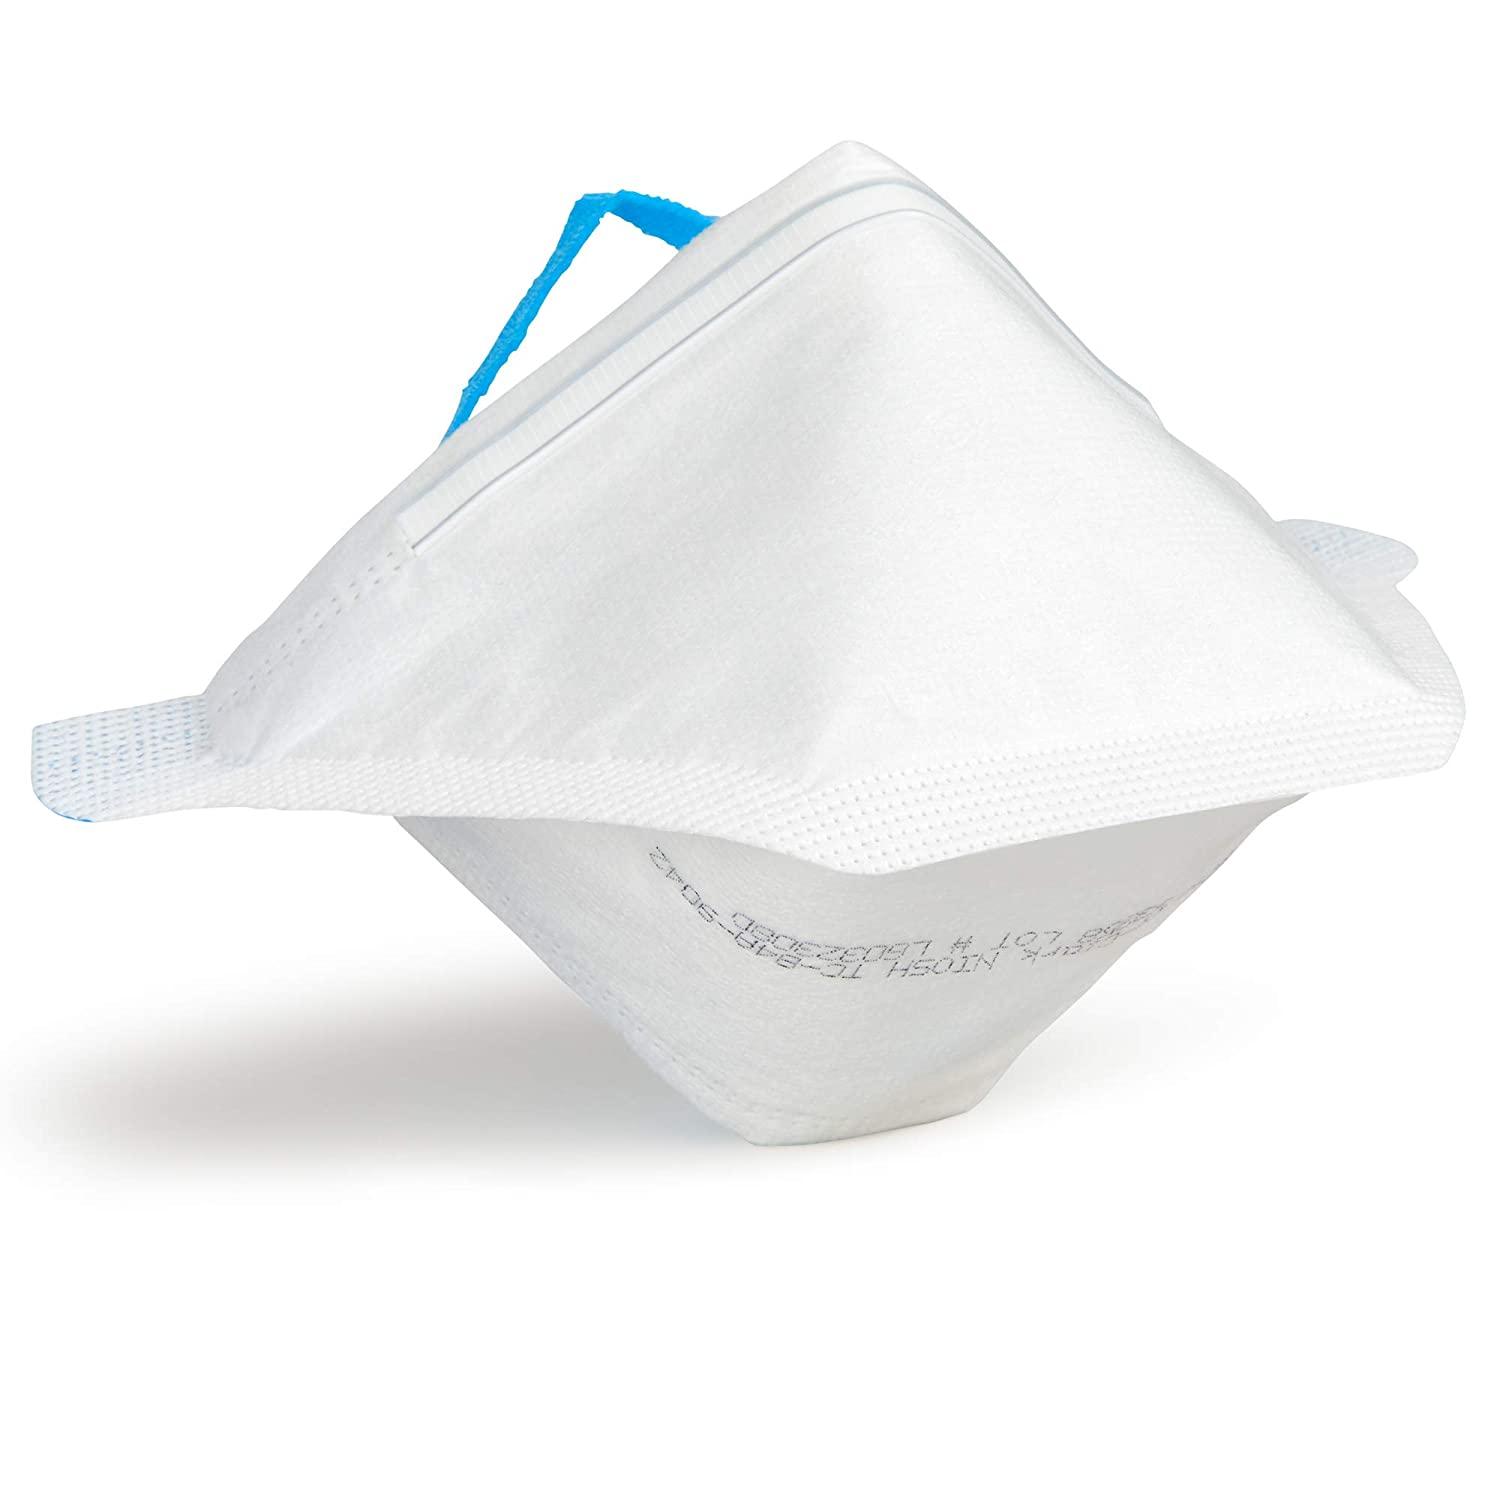 50 Kimberly-Clark N95 Pouch Respirators for $23.19